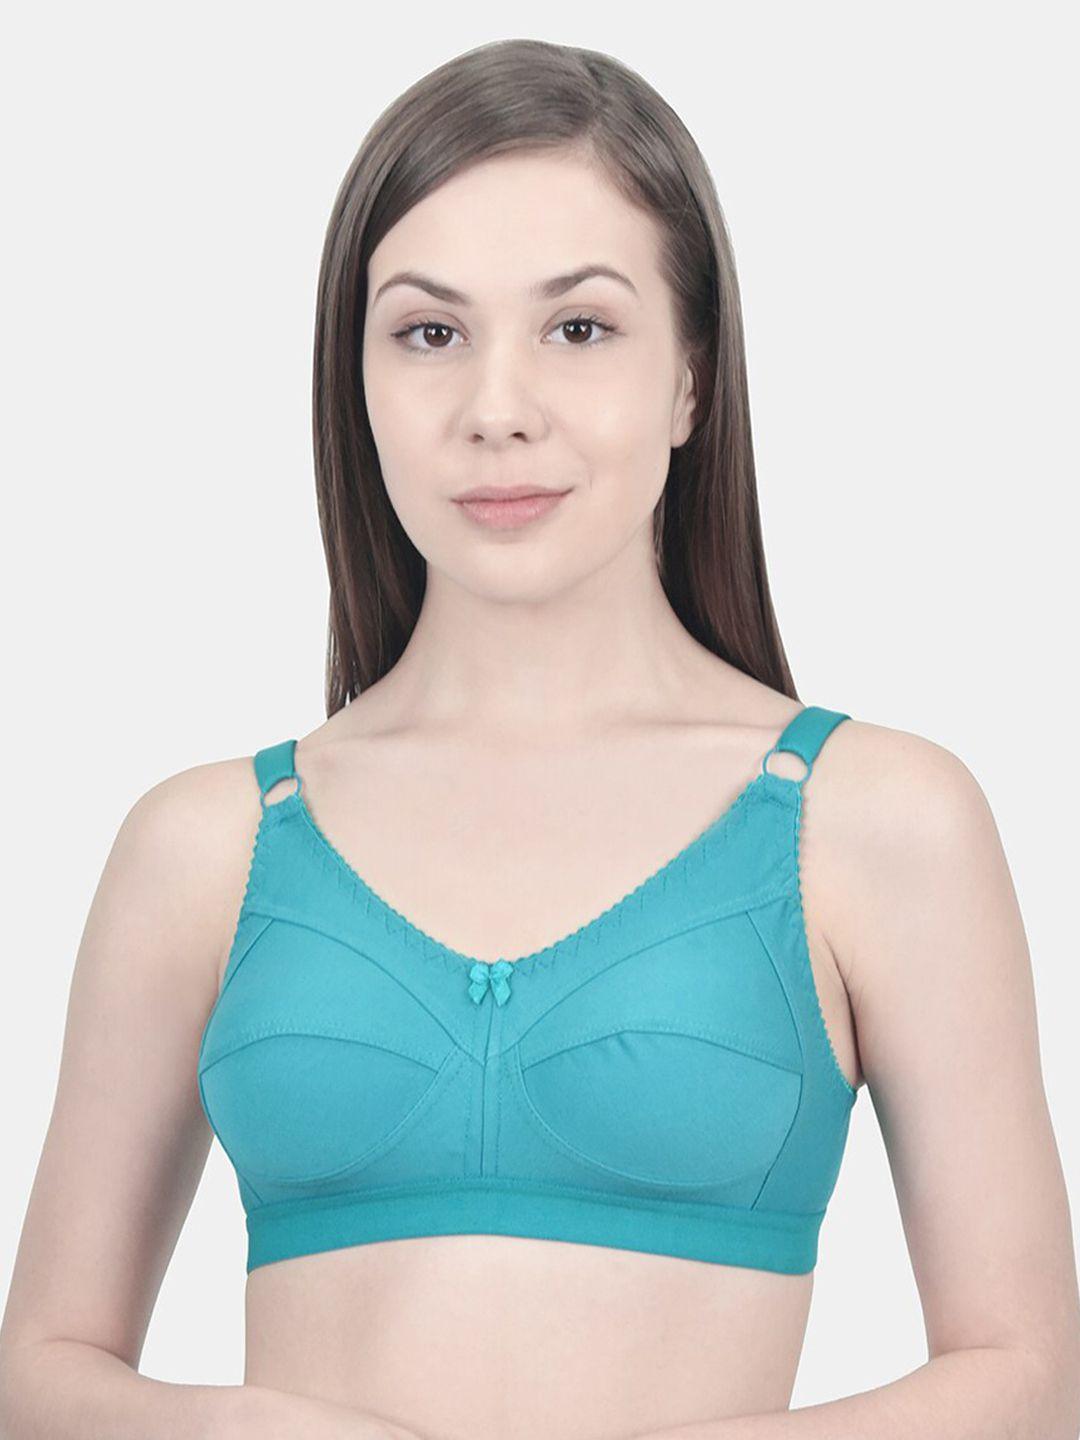 innocence-turquoise-blue-solid-non-wired-non-padded-minimizer-bra-bbaplin90162_28b